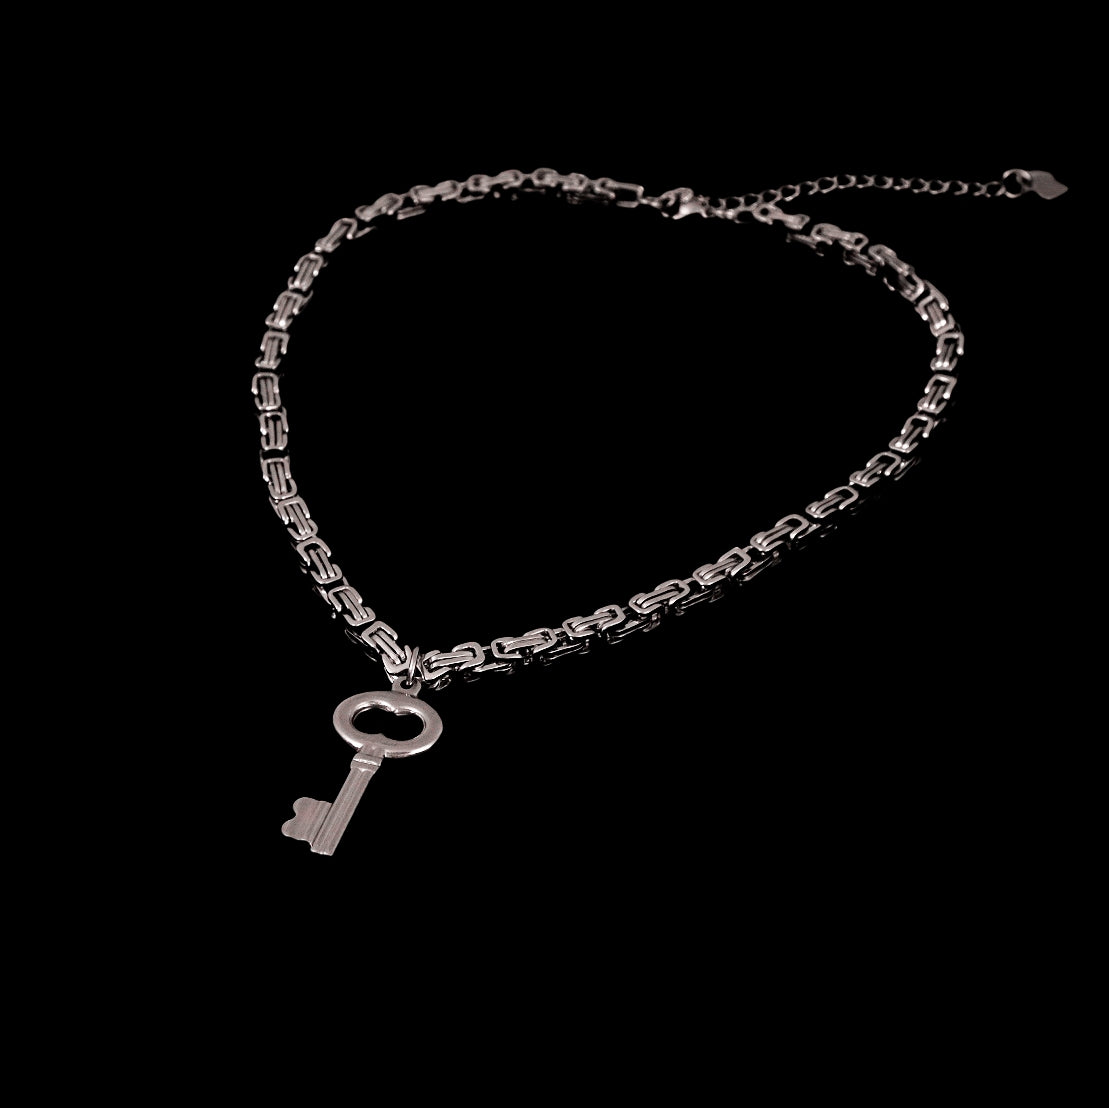 Unlock Key Pendant Necklace | Lock Hearts Collection | Stainless Steel Jewelry Design and Handmade in New York | Sustainable Stainless Steel Jewelry